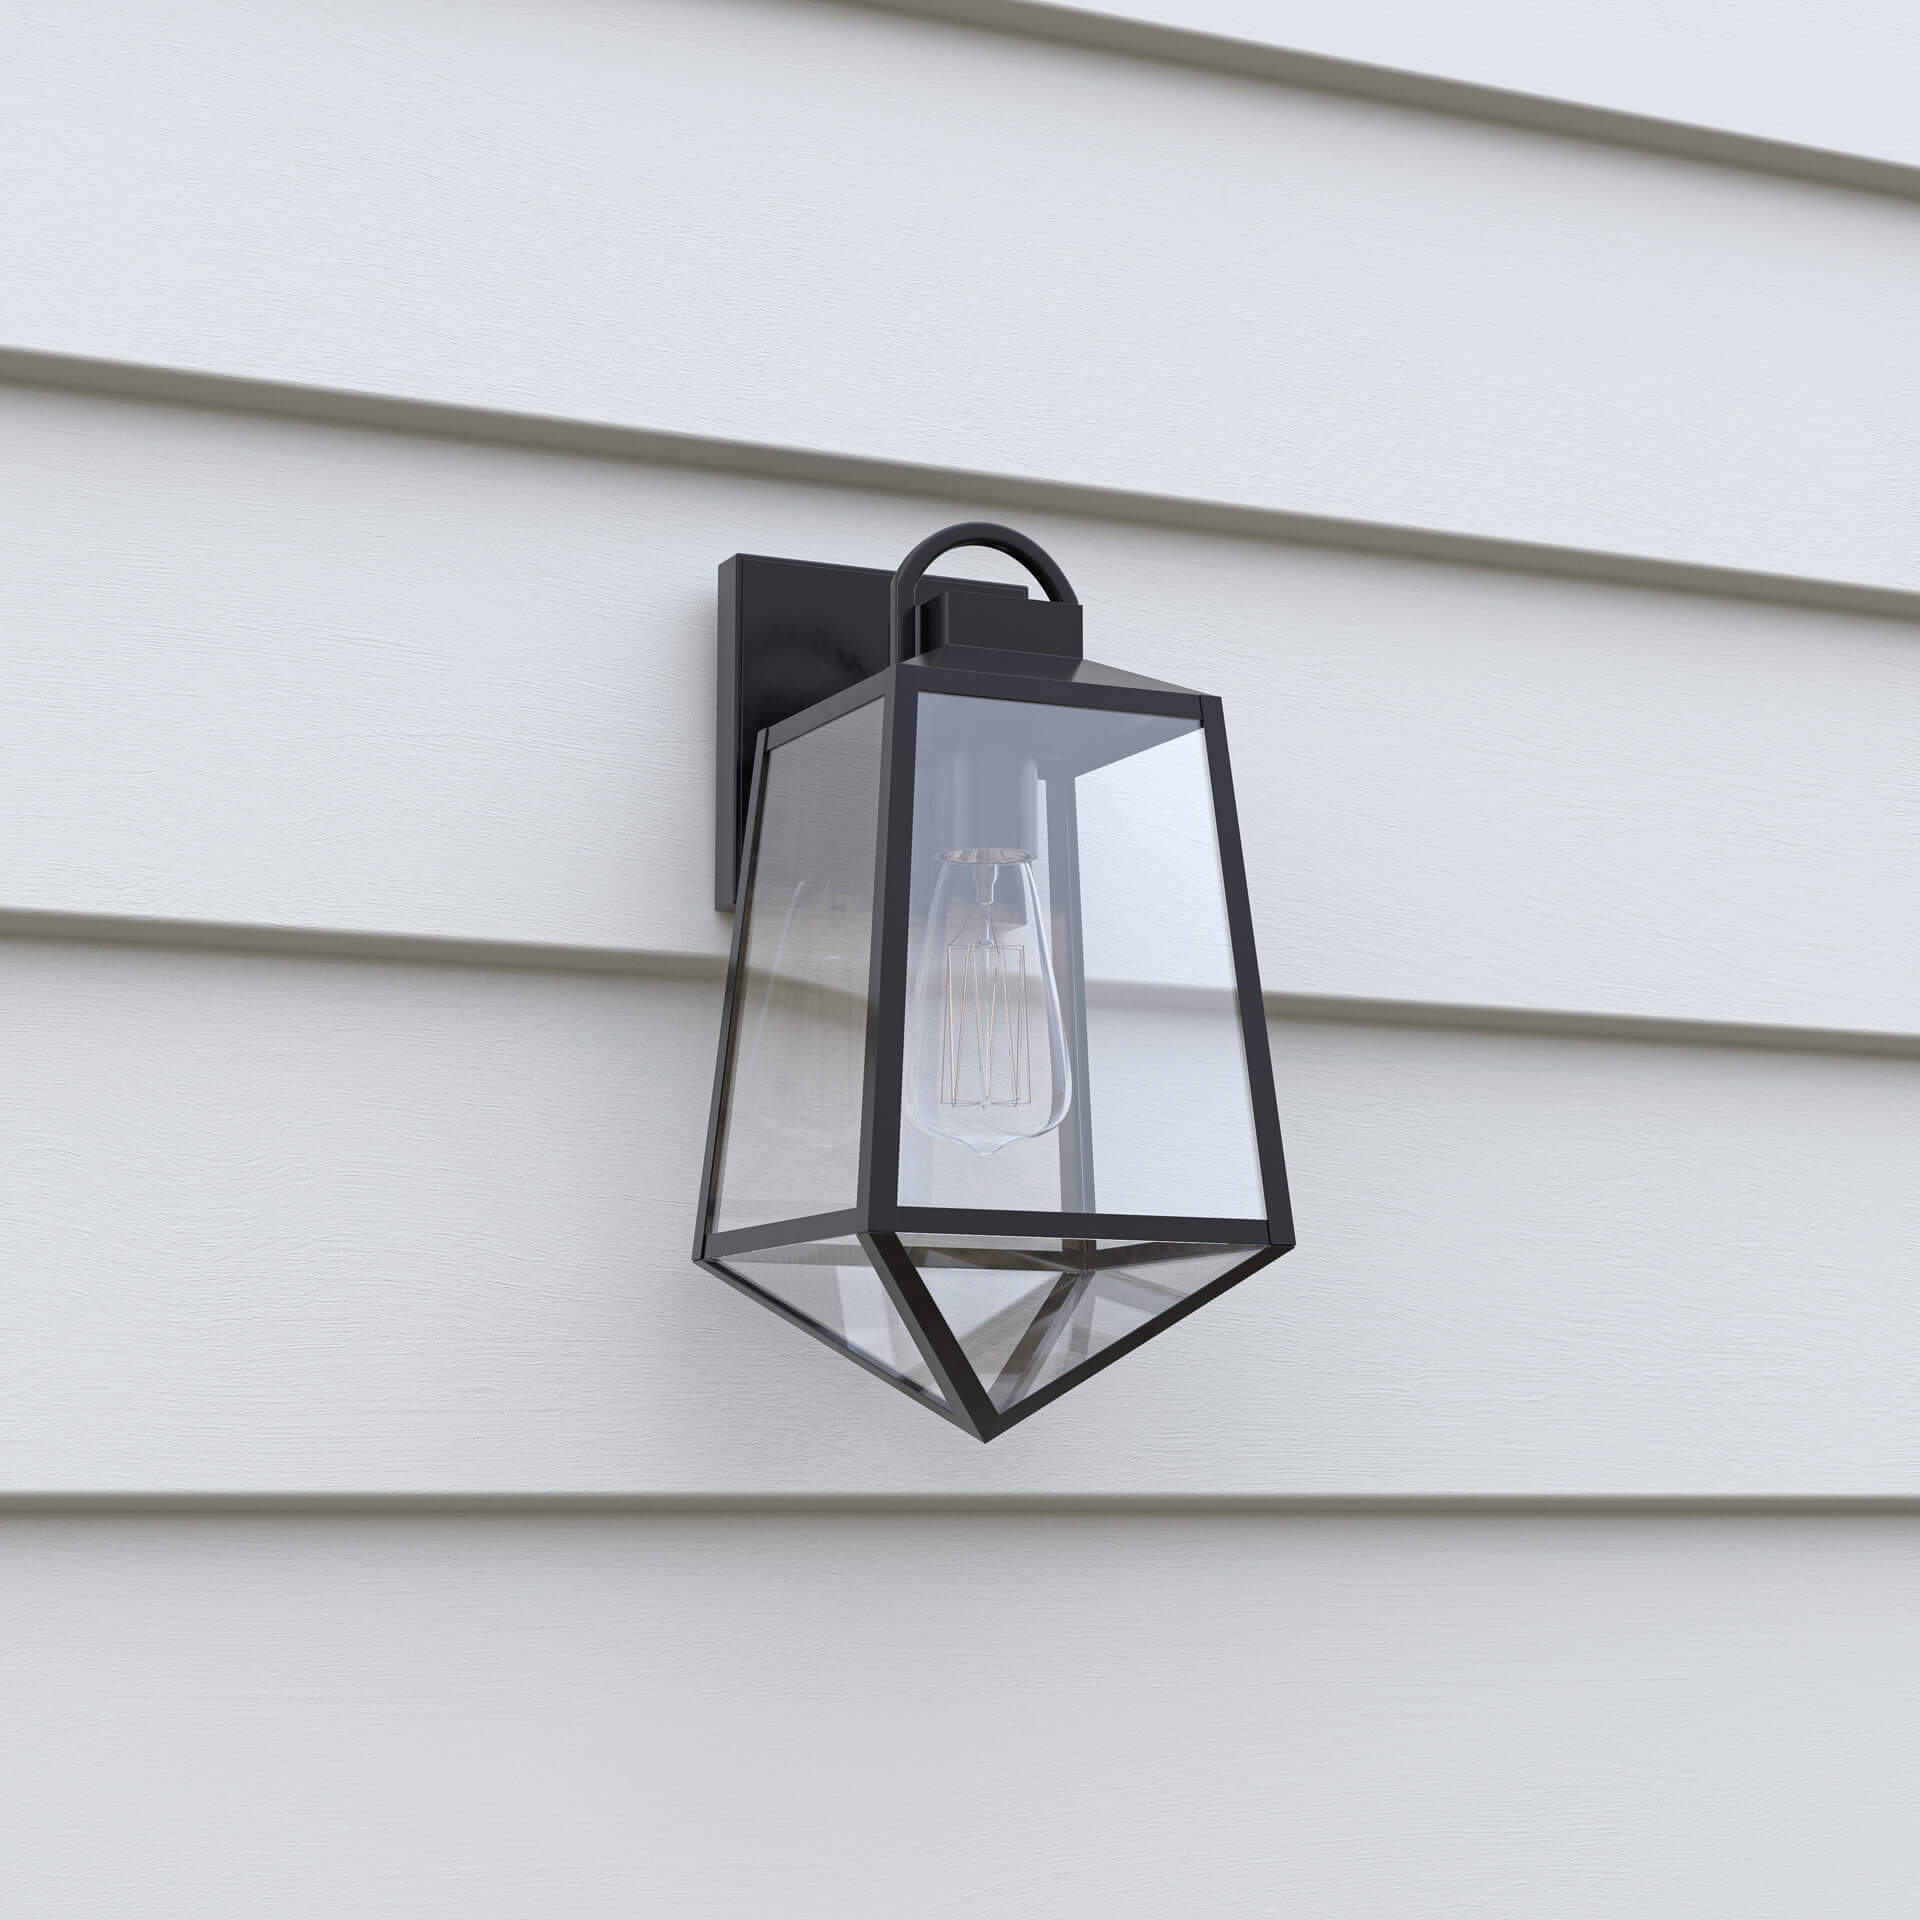 Product Detail Image of Black Outdoor Wall Light